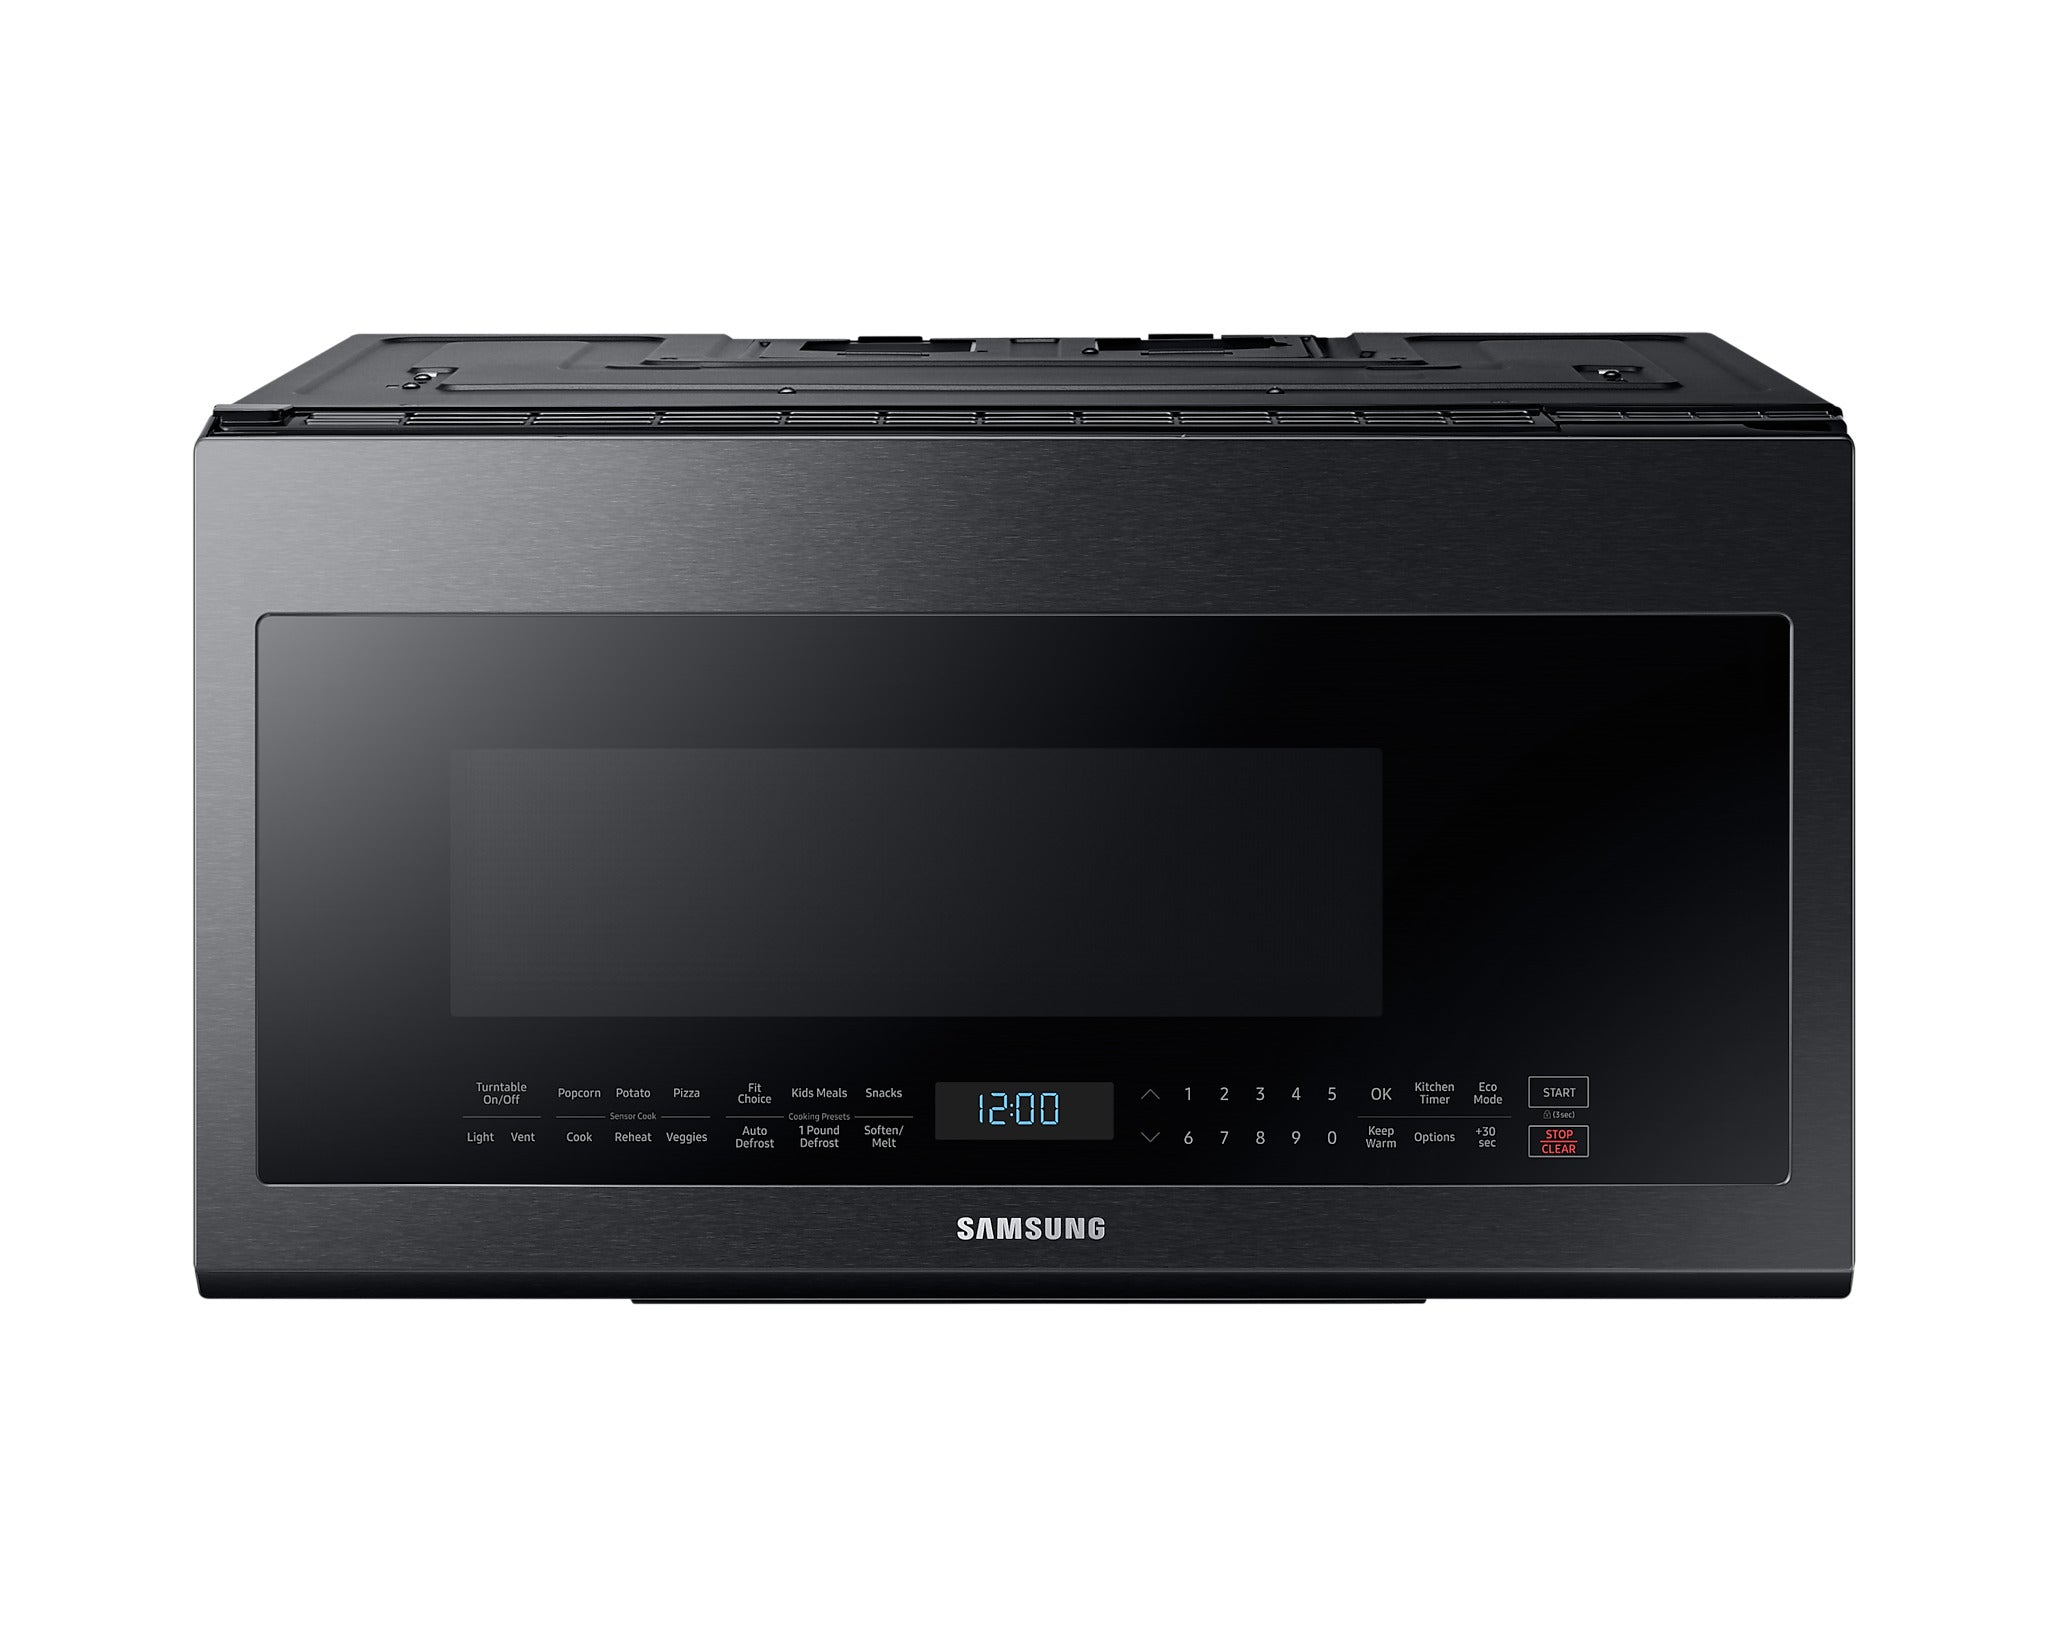 ME21M706BAG - MICROWAVES OVENS - Samsung - Over-The-Range - Black Stainless - Open Box - MICROWAVES OVENS - BonPrix Électroménagers